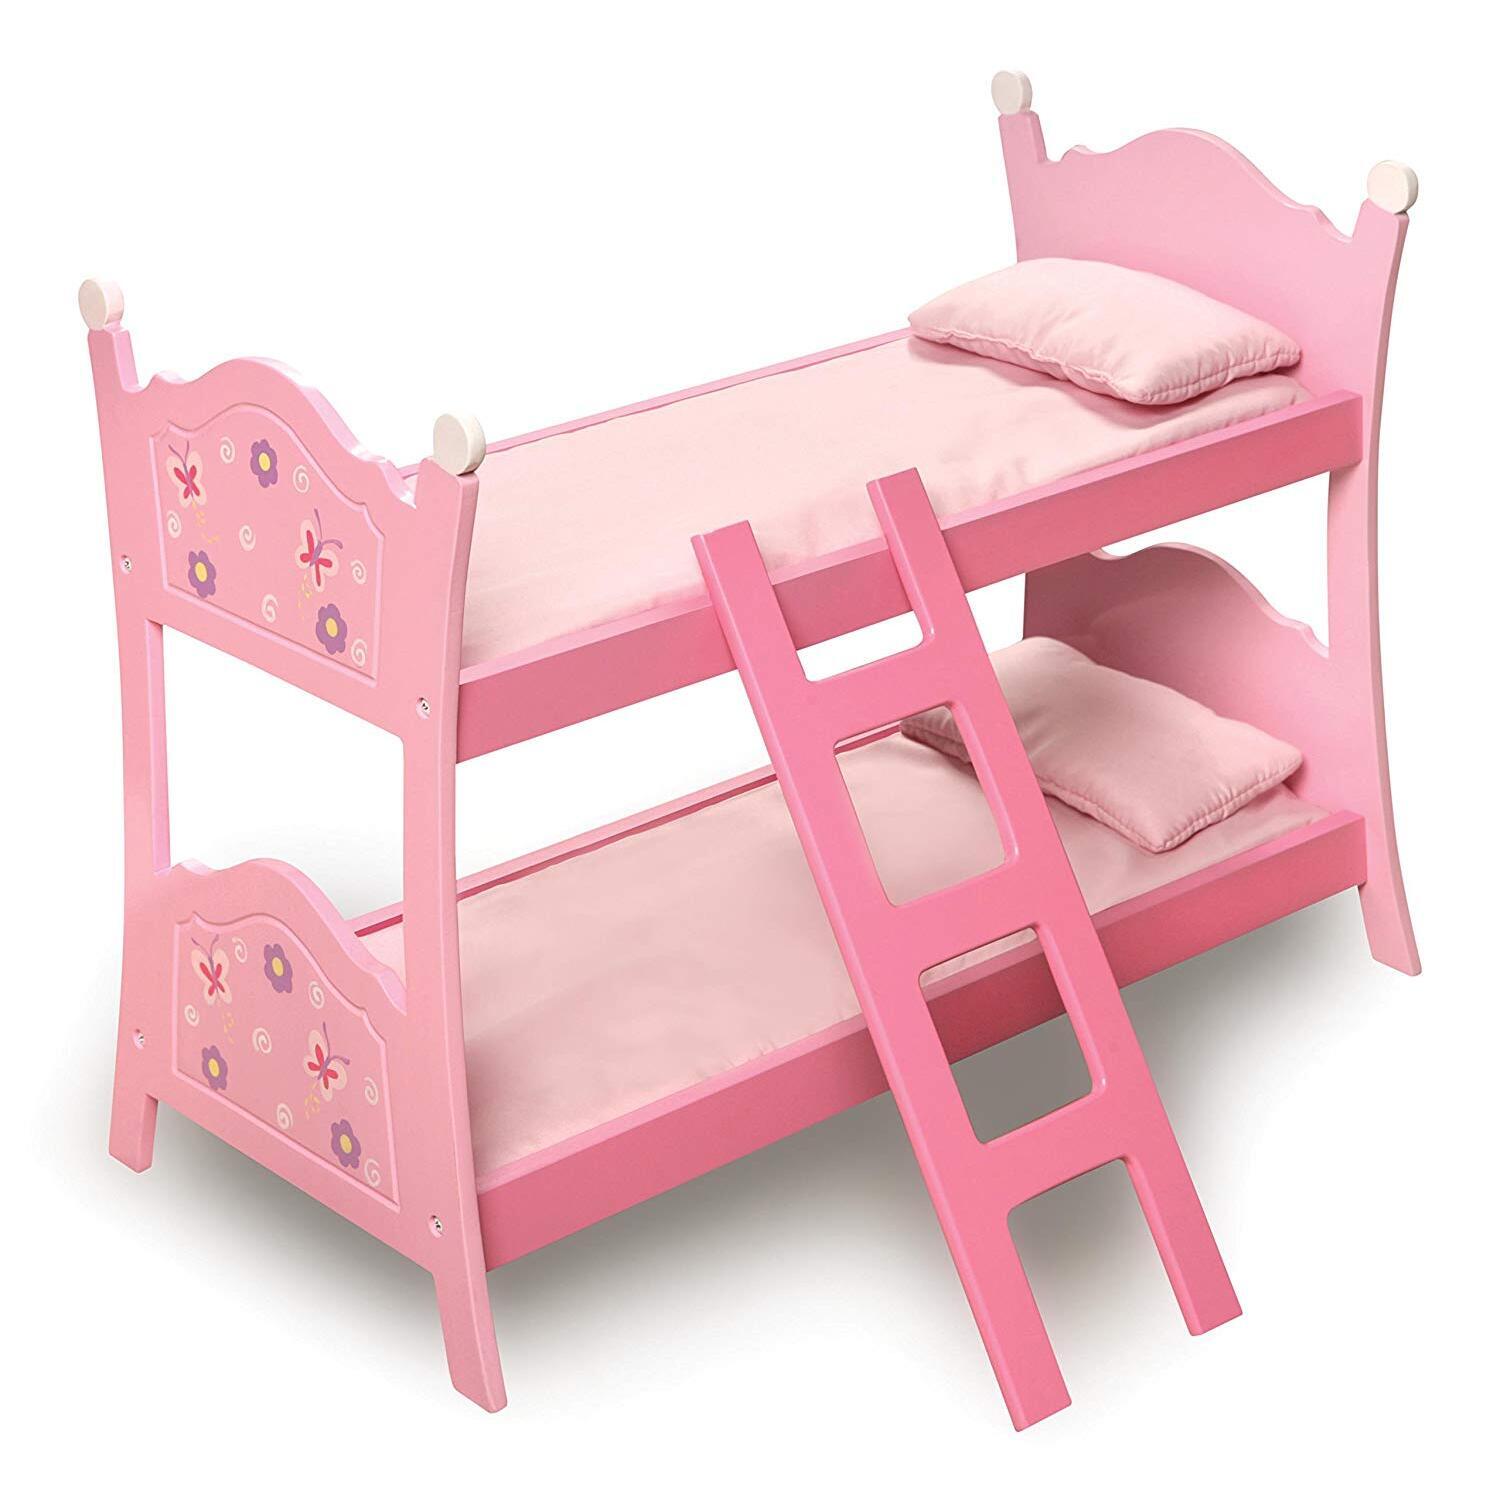 Blossoms and Butterflies Doll Bunk Bed-Material:100% Polyester Fabric - image 1 of 3